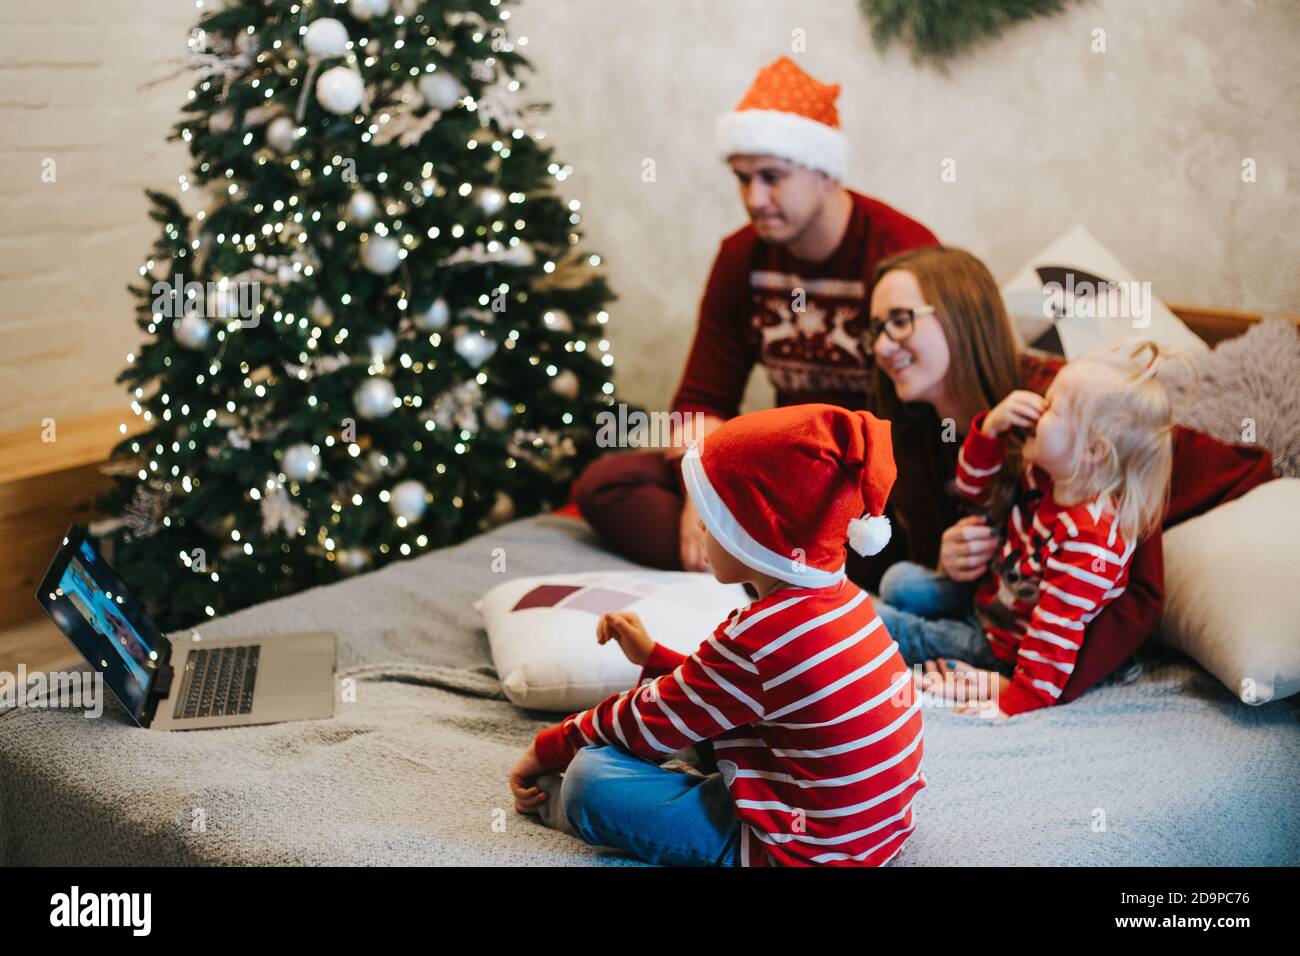 Cheerful children talking to Santa Claus on video chat at Christmas Stock Photo